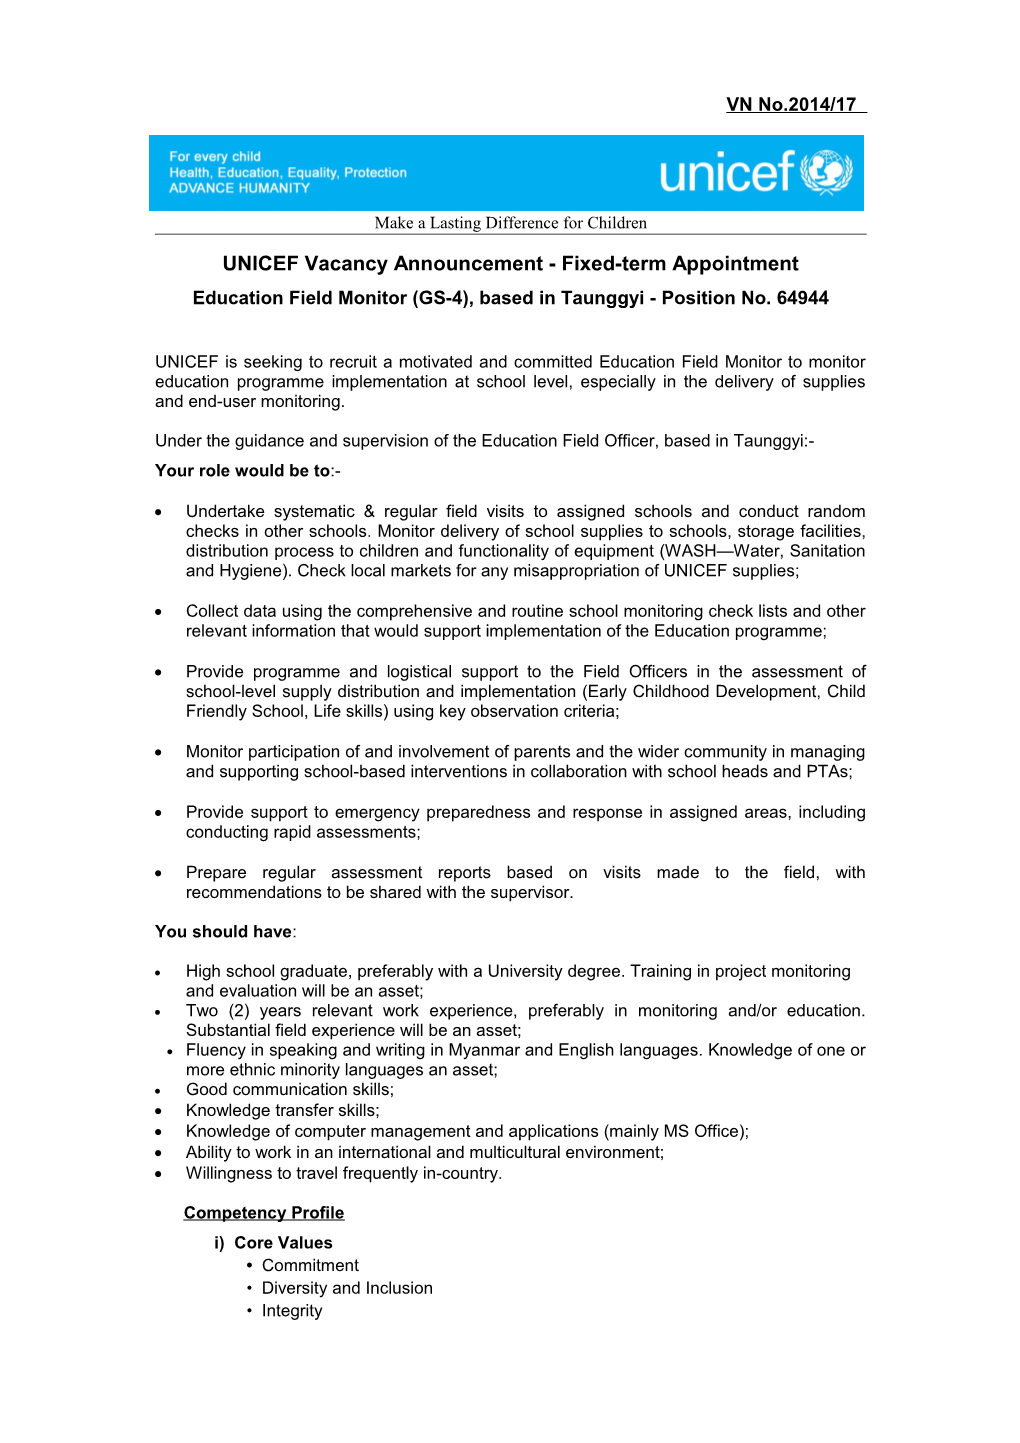 UNICEF Vacancy Announcement - Fixed-Term Appointment